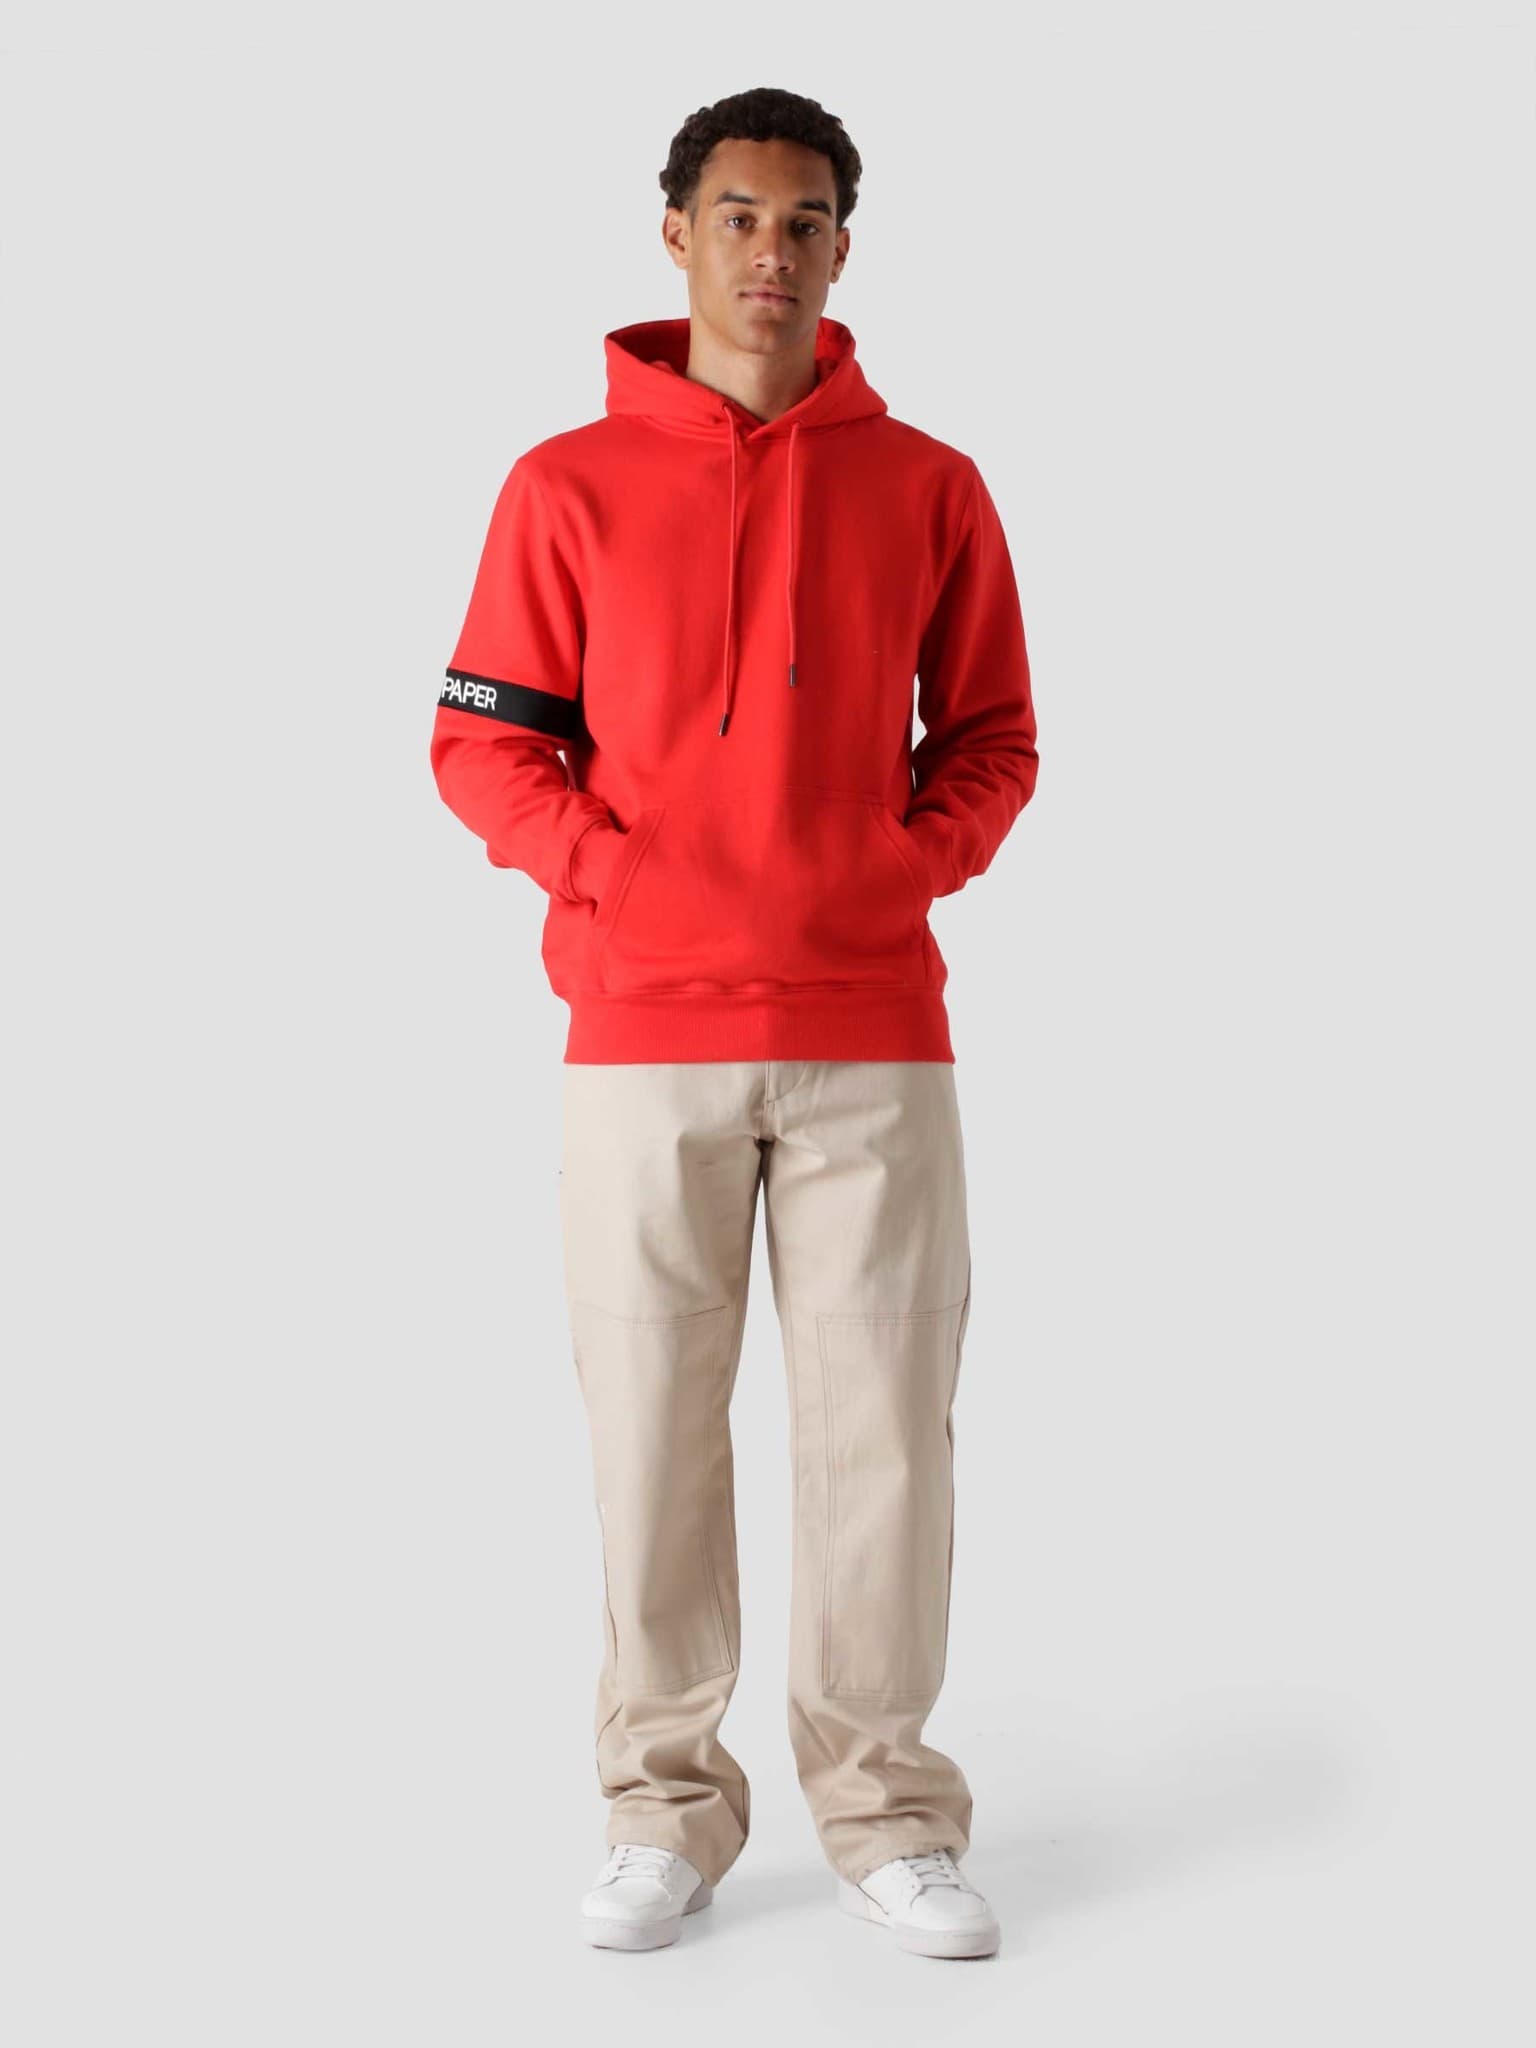 Captain Hoodie Red NOST34